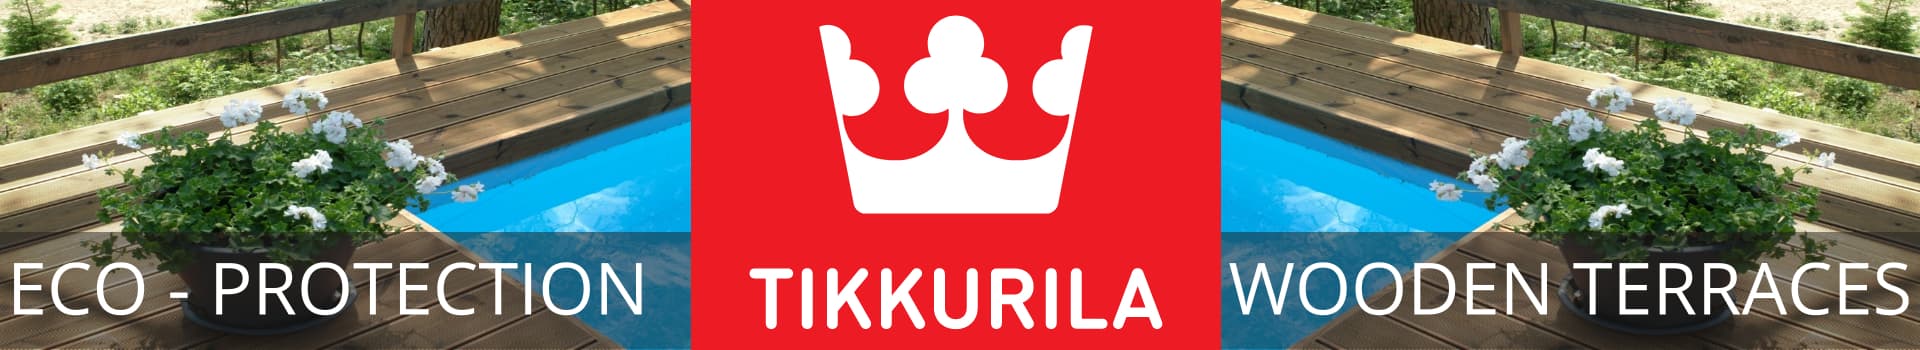 Paint and Varnishes - TIKKURILA - ecological protection of the terrace